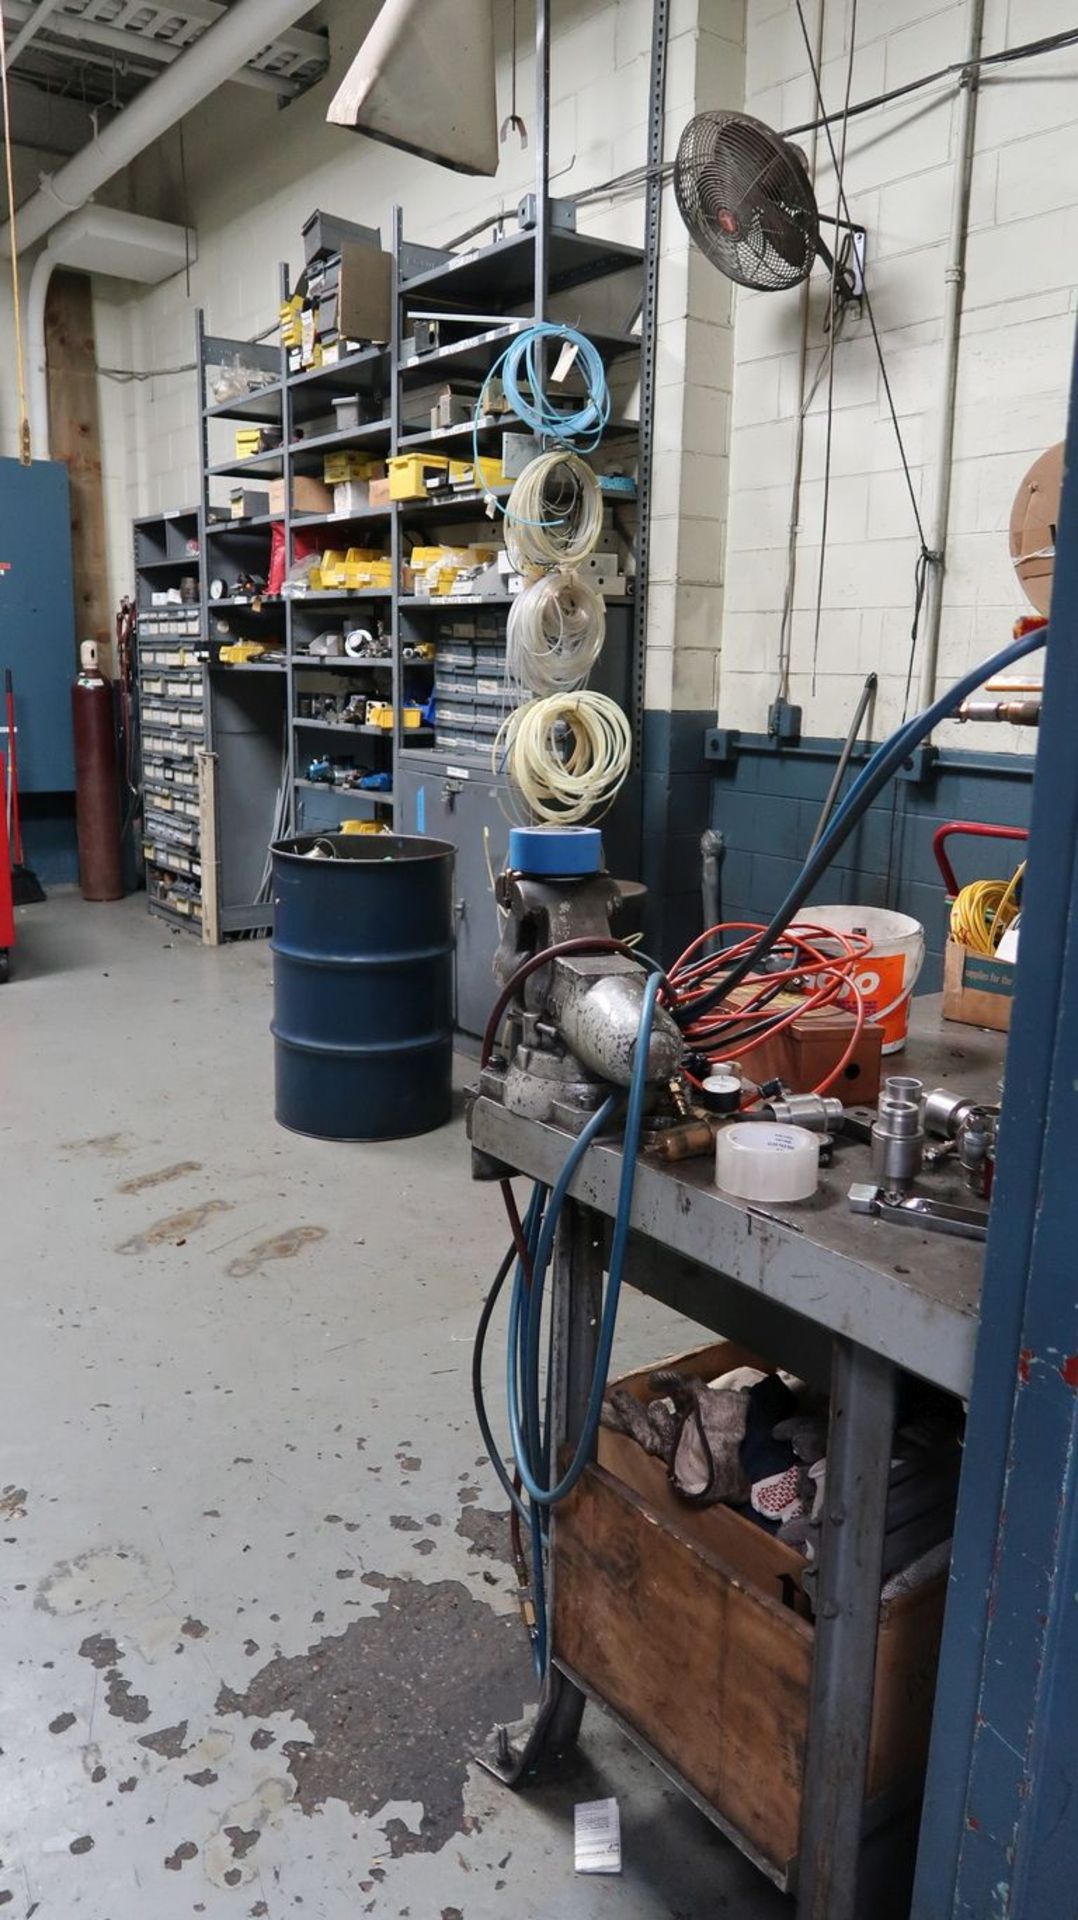 (LOT) CONTENTS OF MAINTENANCE ROOM INCLUDING LIGHTING, HYDRAULIC HOSE, HARDWARE, CONNECTORS,